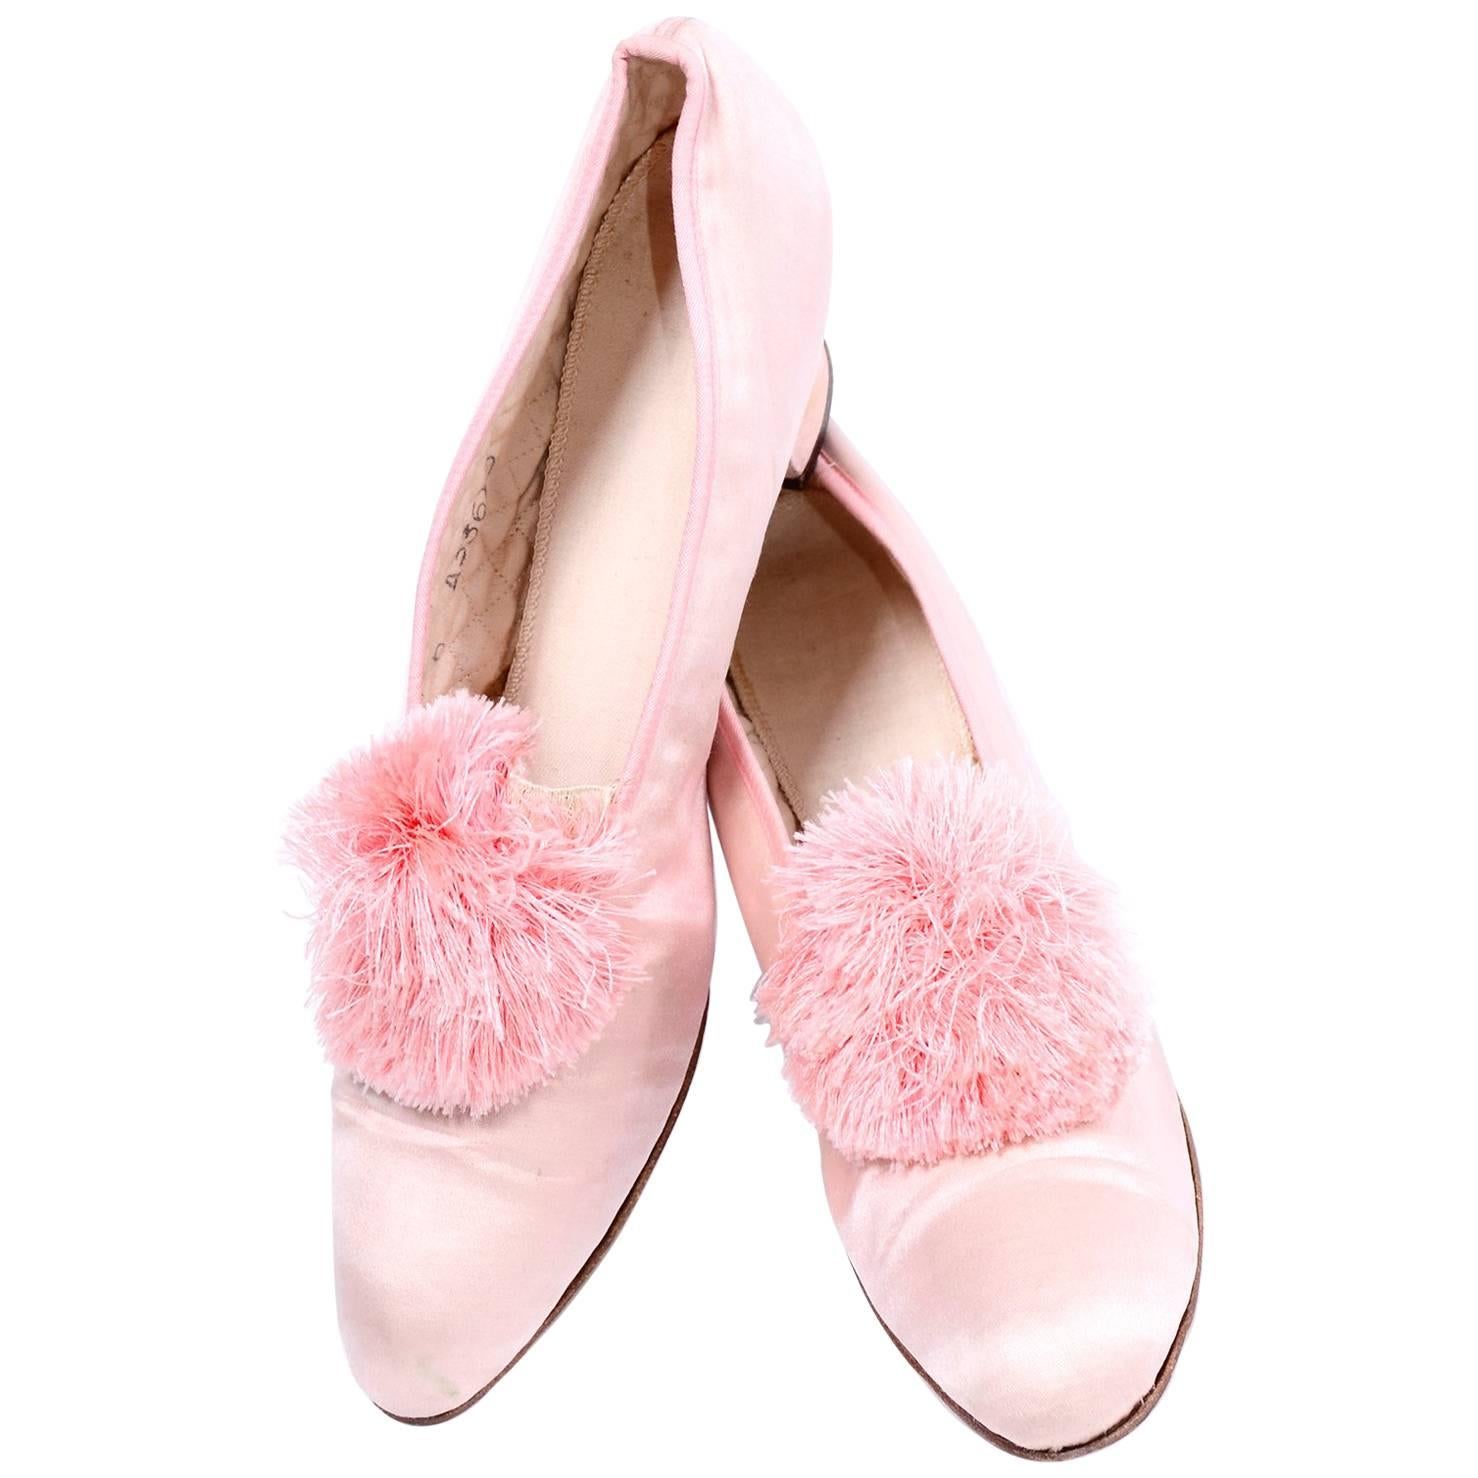 Marshall Field Edwardian Pink Satin Vintage Shoes With Pom Poms 7